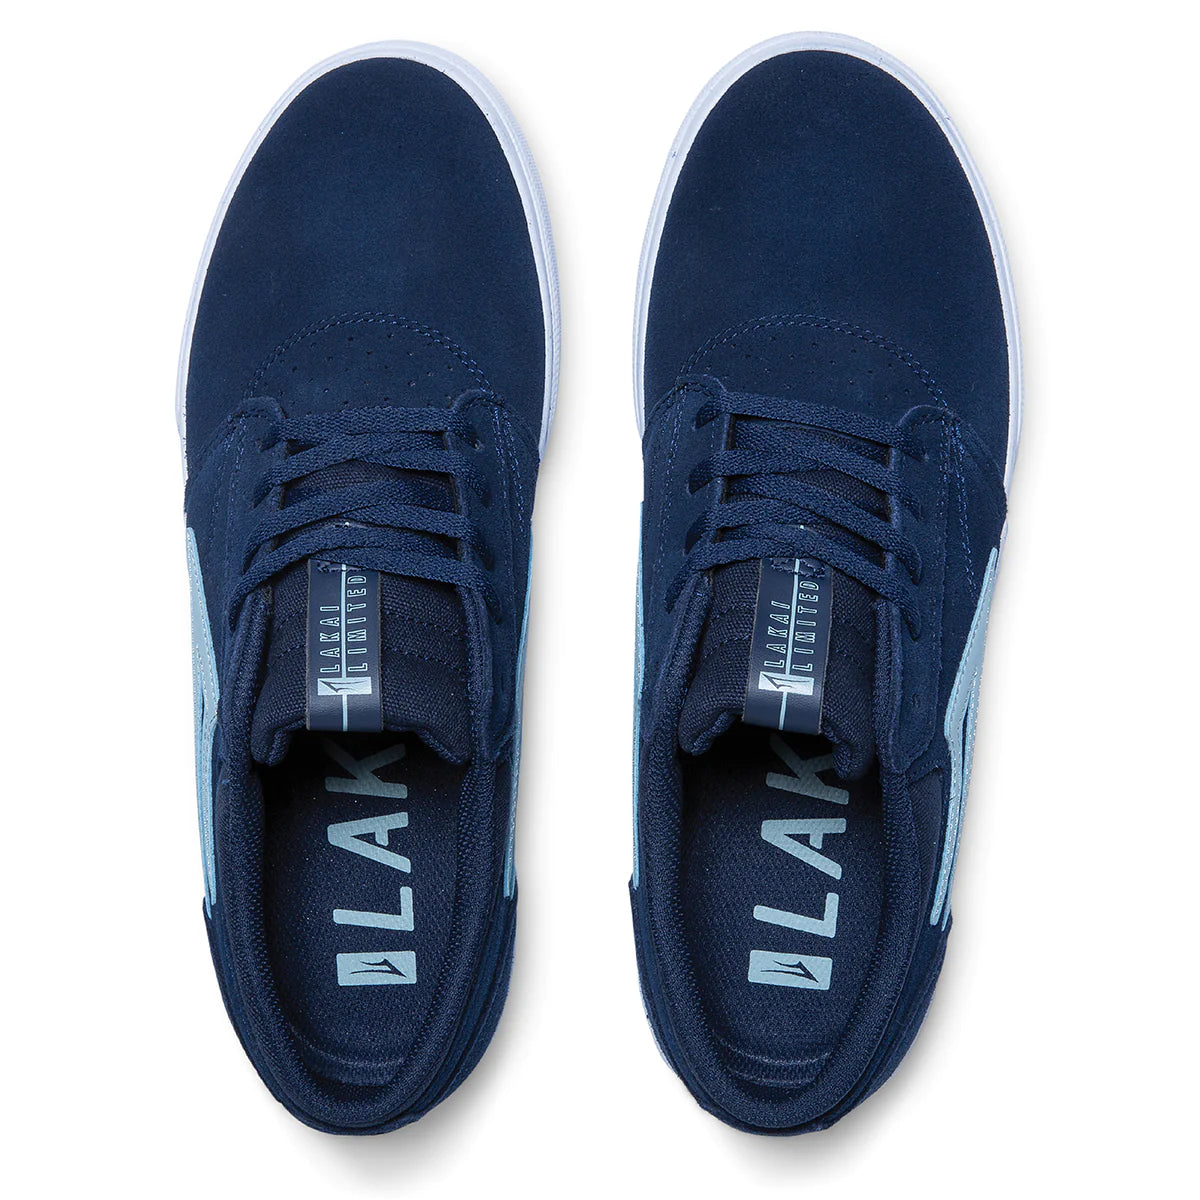 Lakai Griffin Shoes - Navy Suede